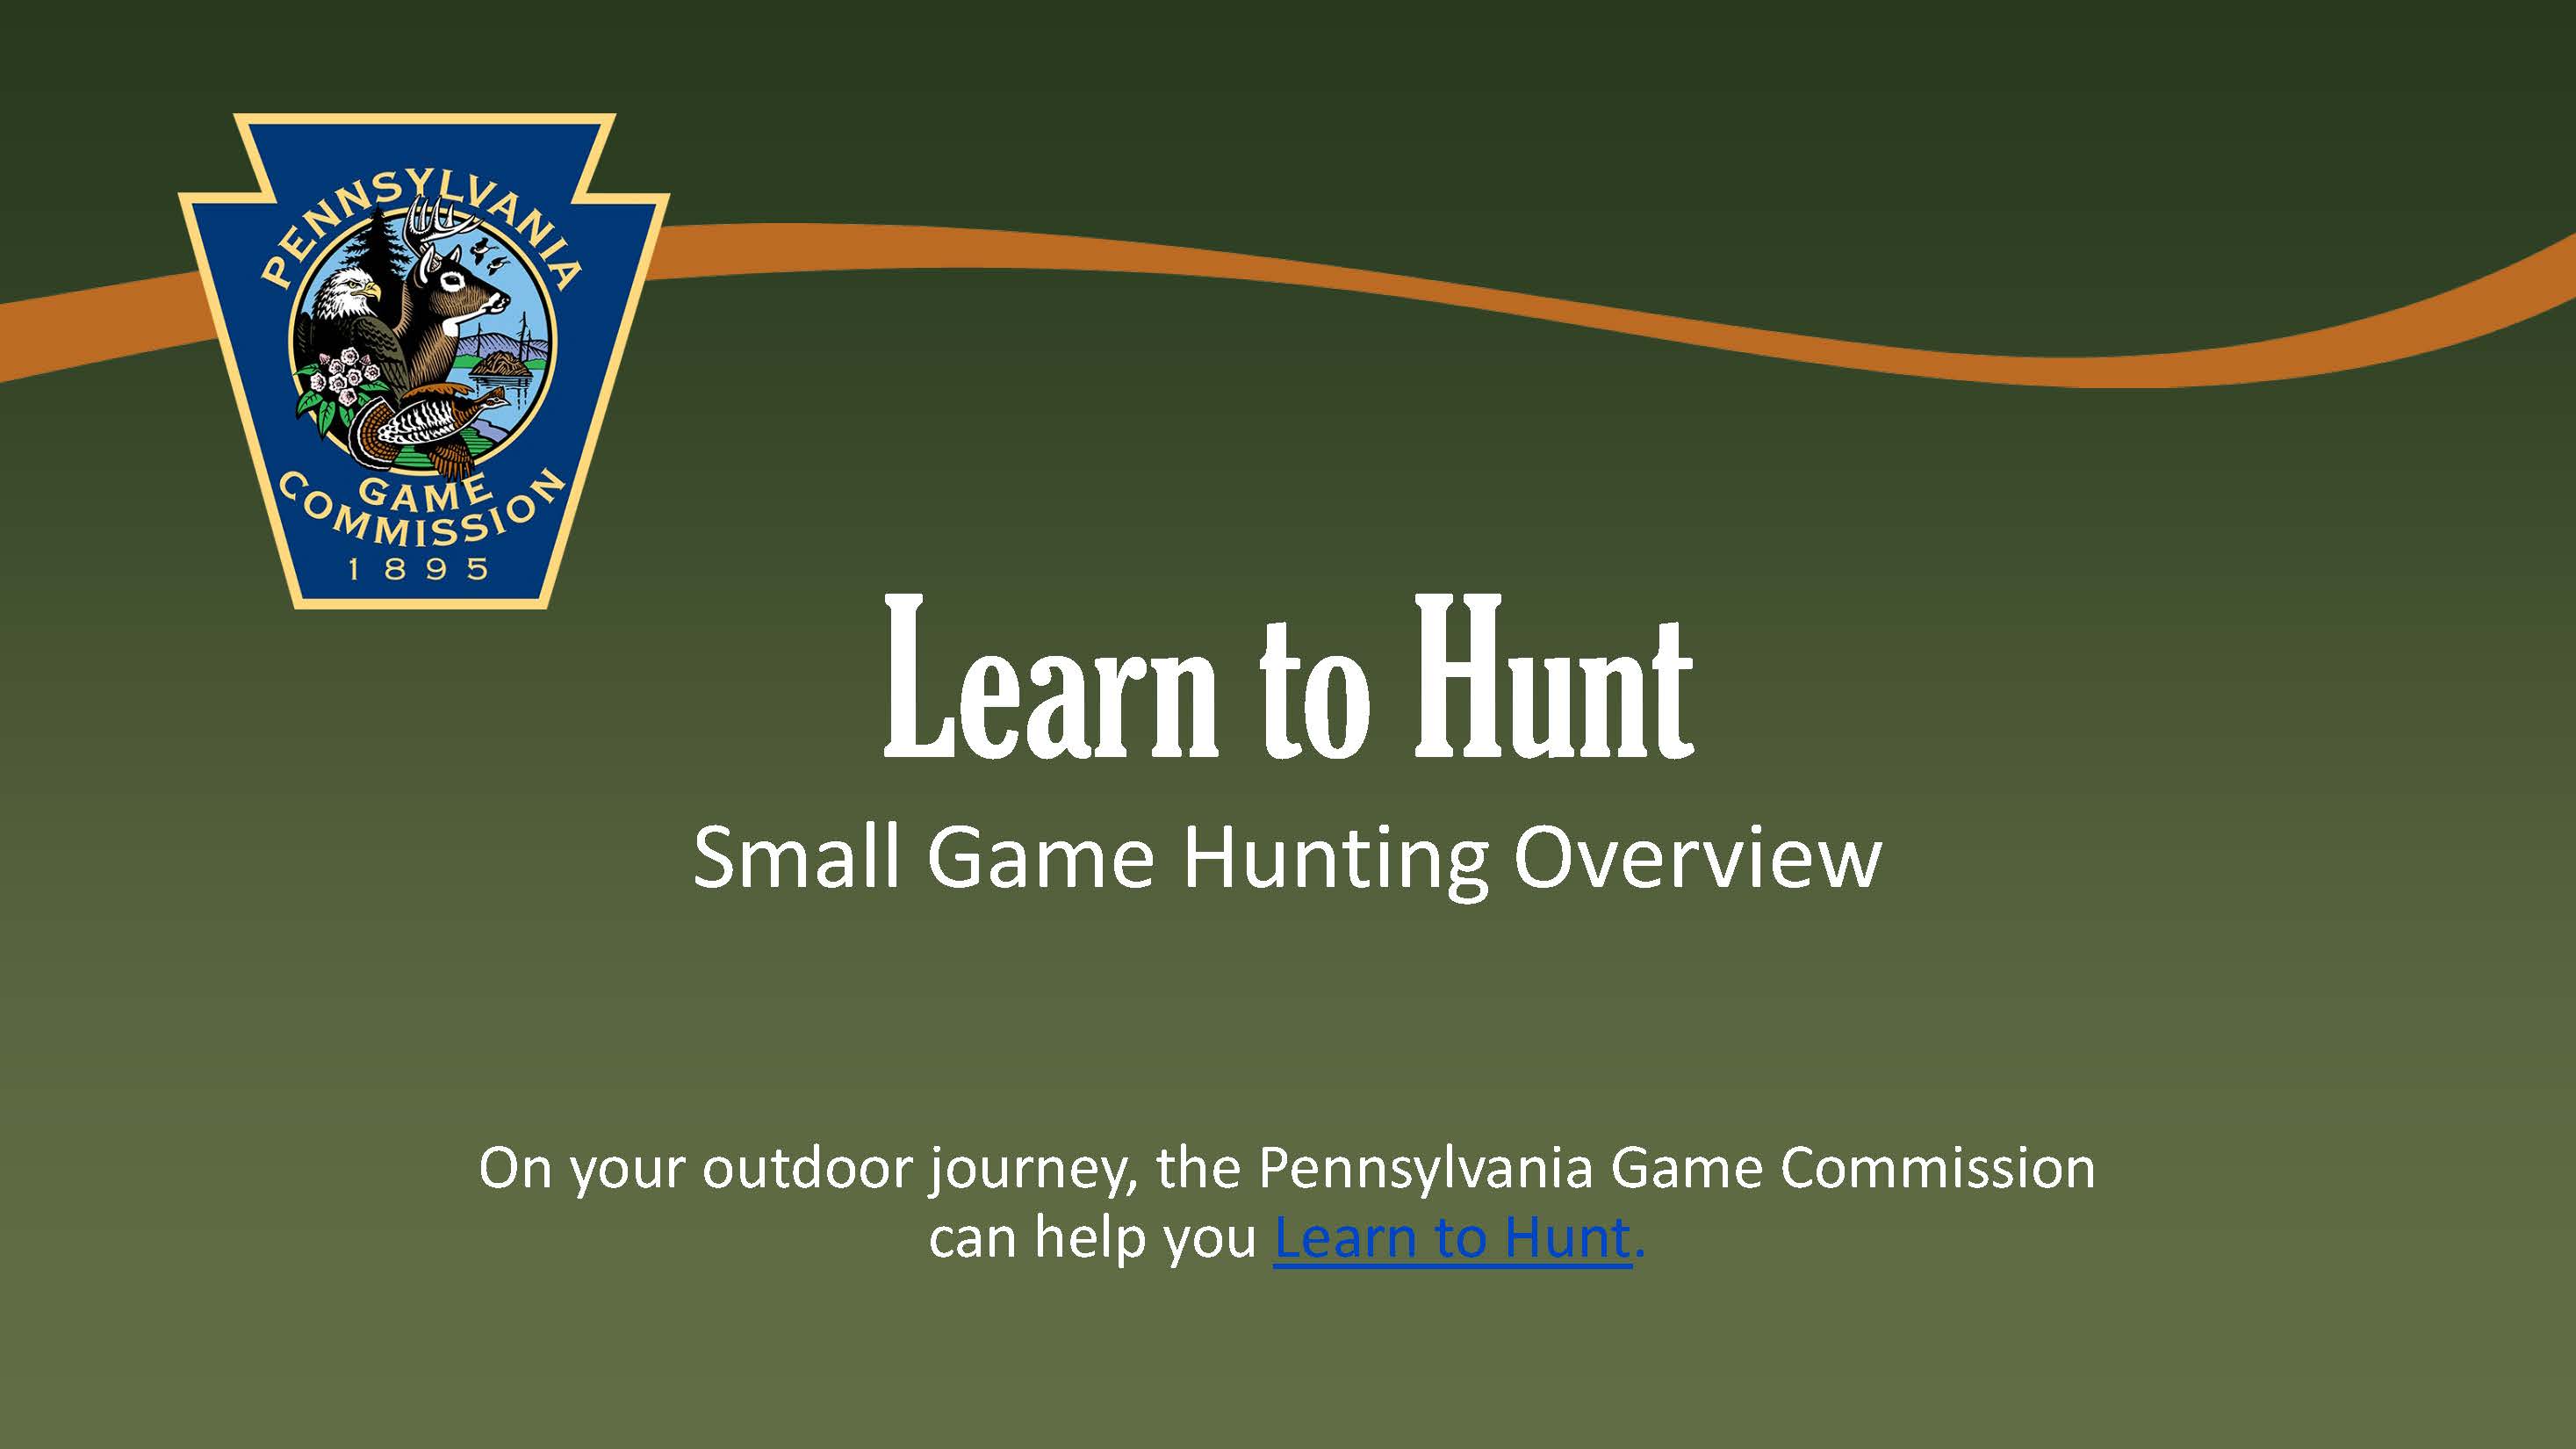 Small Game Hunting Overview